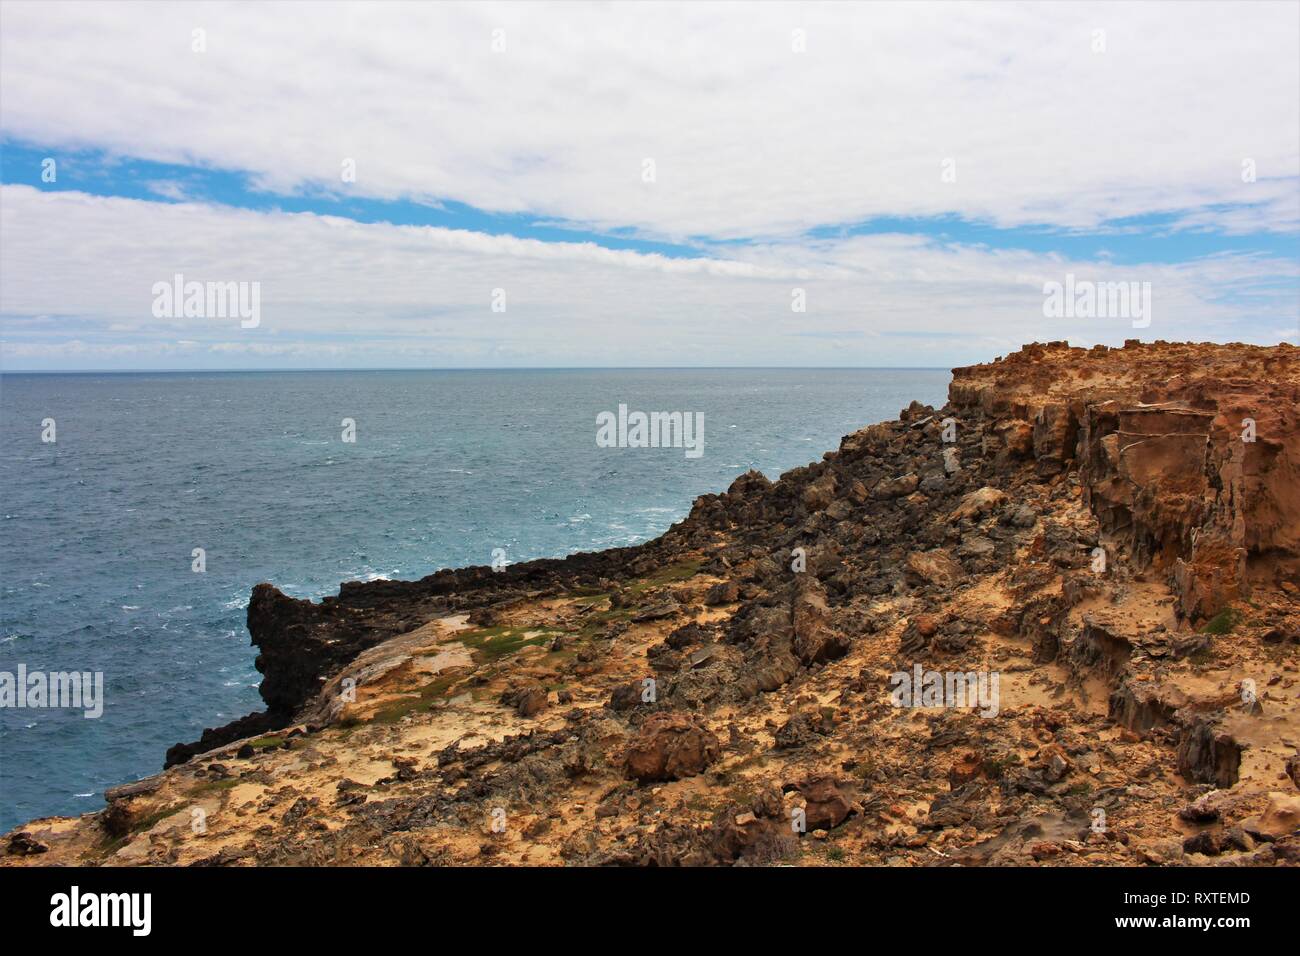 Striking sandy rock formations with black rocks and the ocean in the background at the petrified forest, on the south coast of Australia Stock Photo